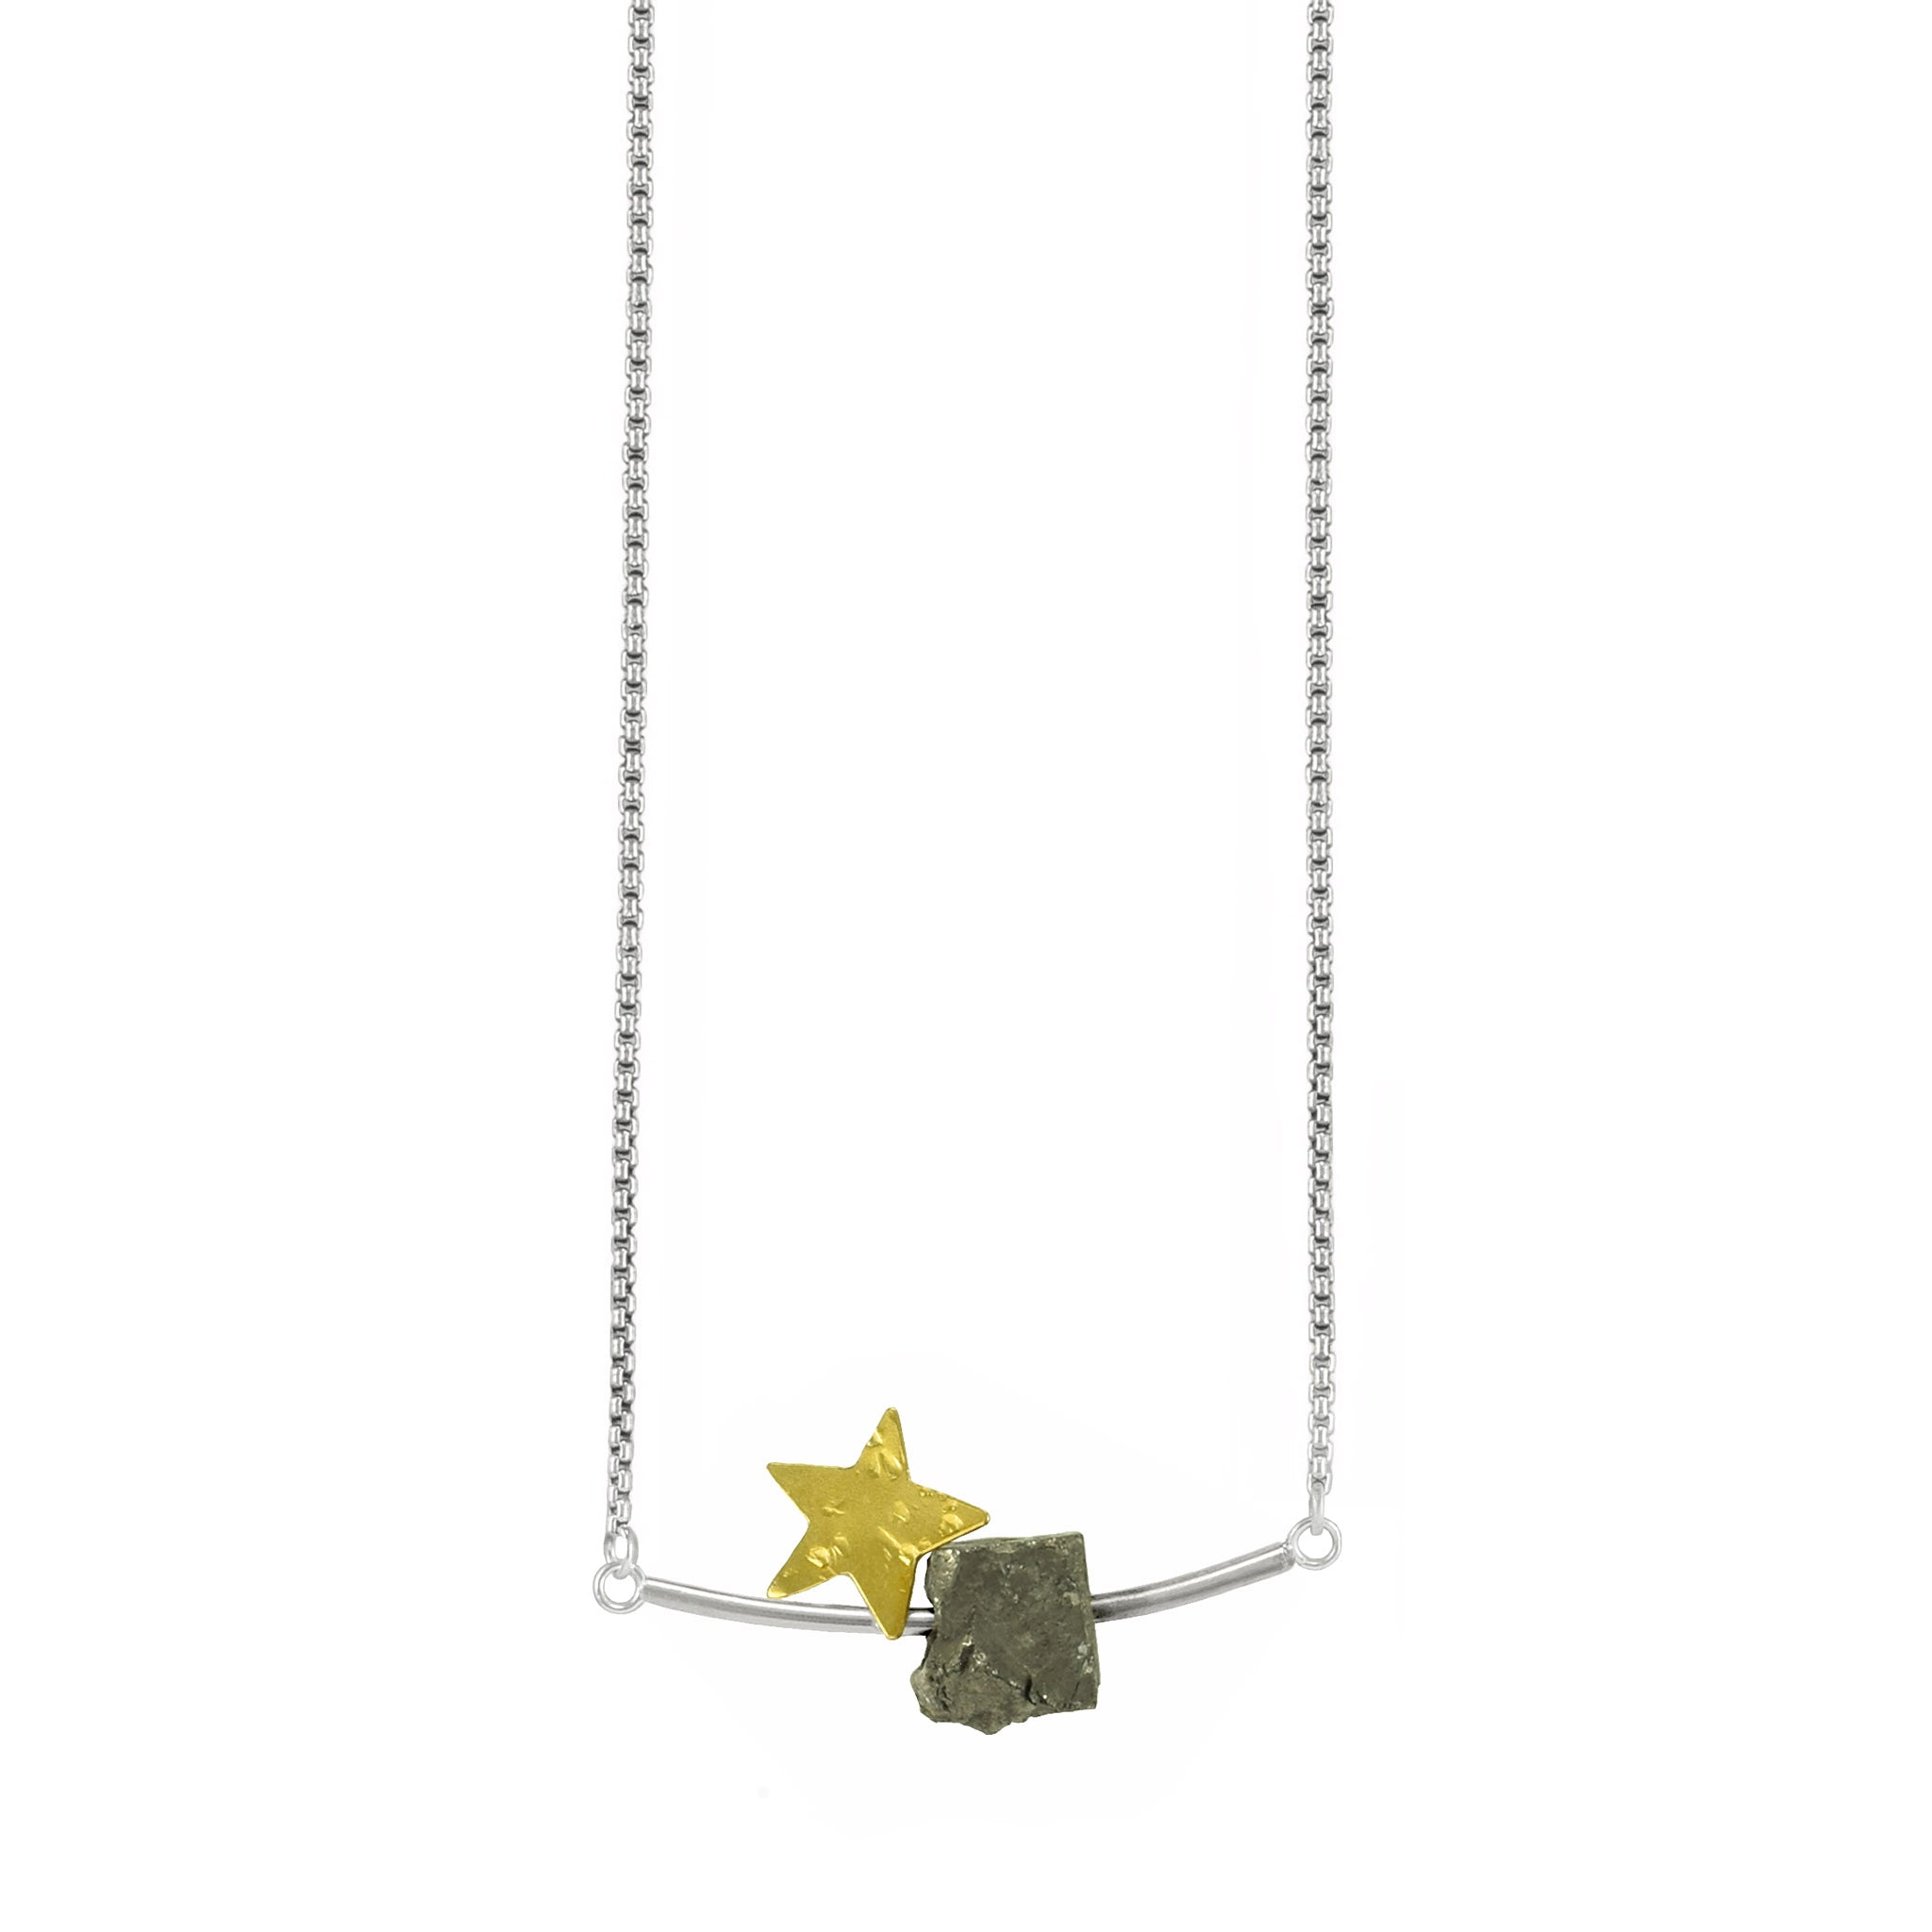 Shimmering Dreams Gold Star Necklace with pyrite by Maria Blondet Jewelry